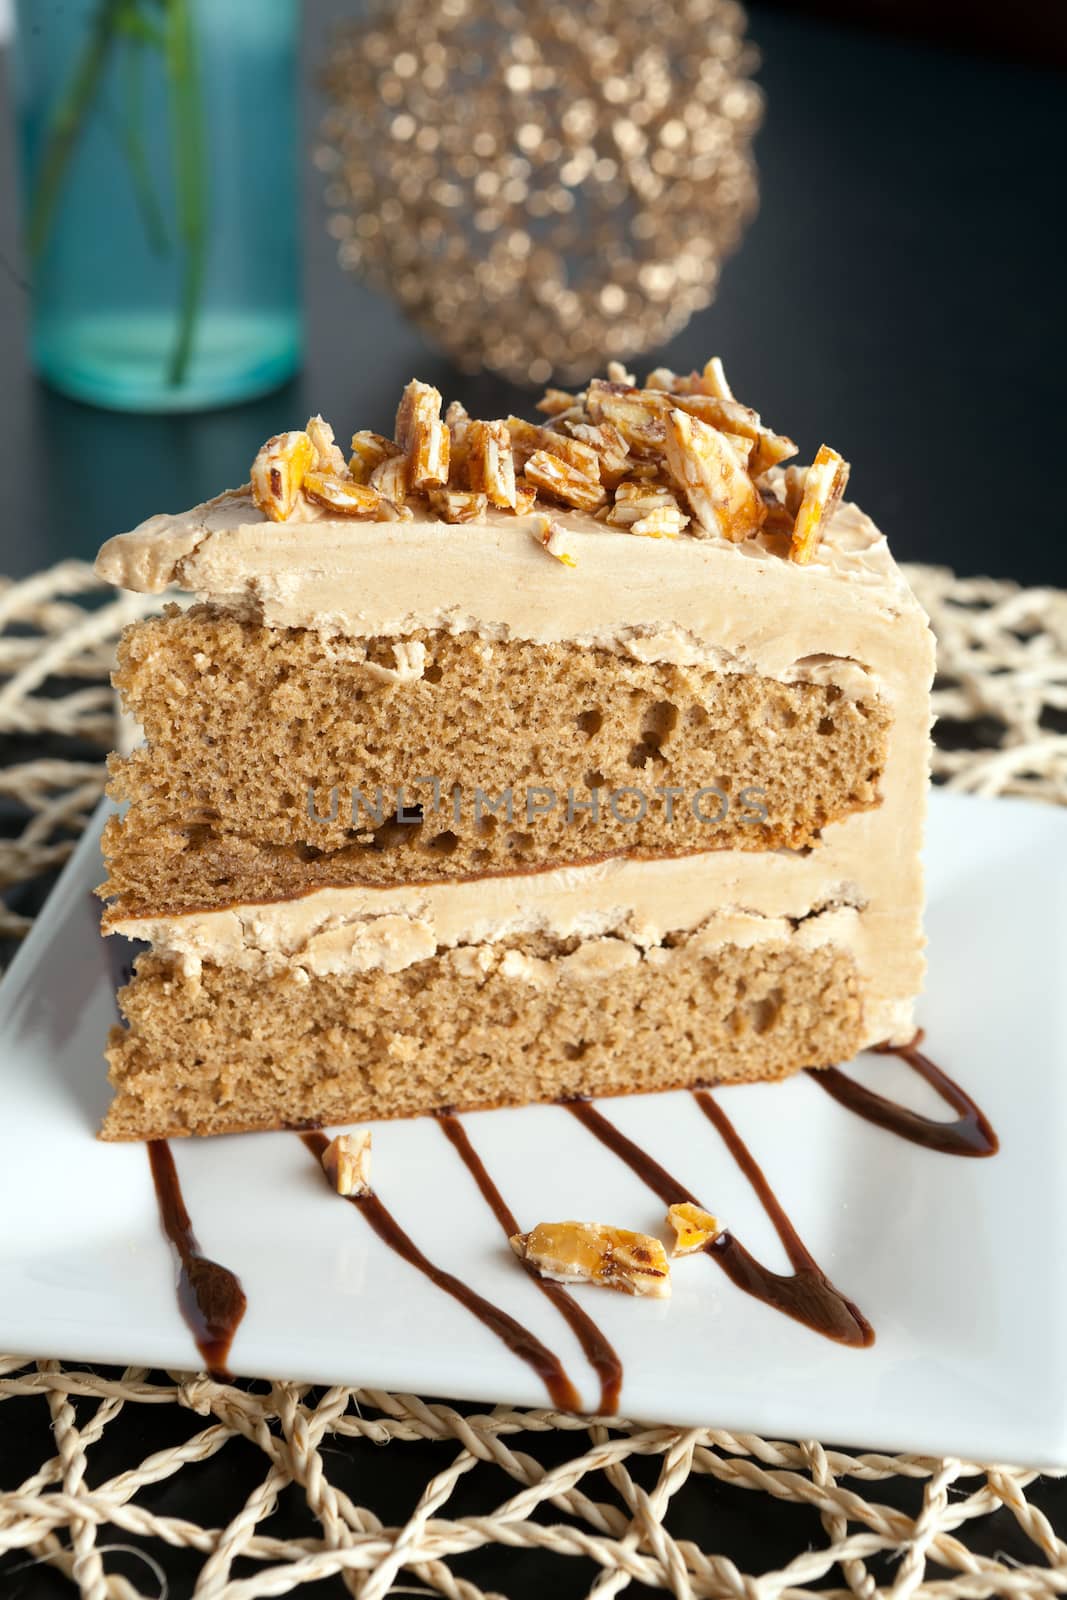 Almond Toffee Cake by graficallyminded